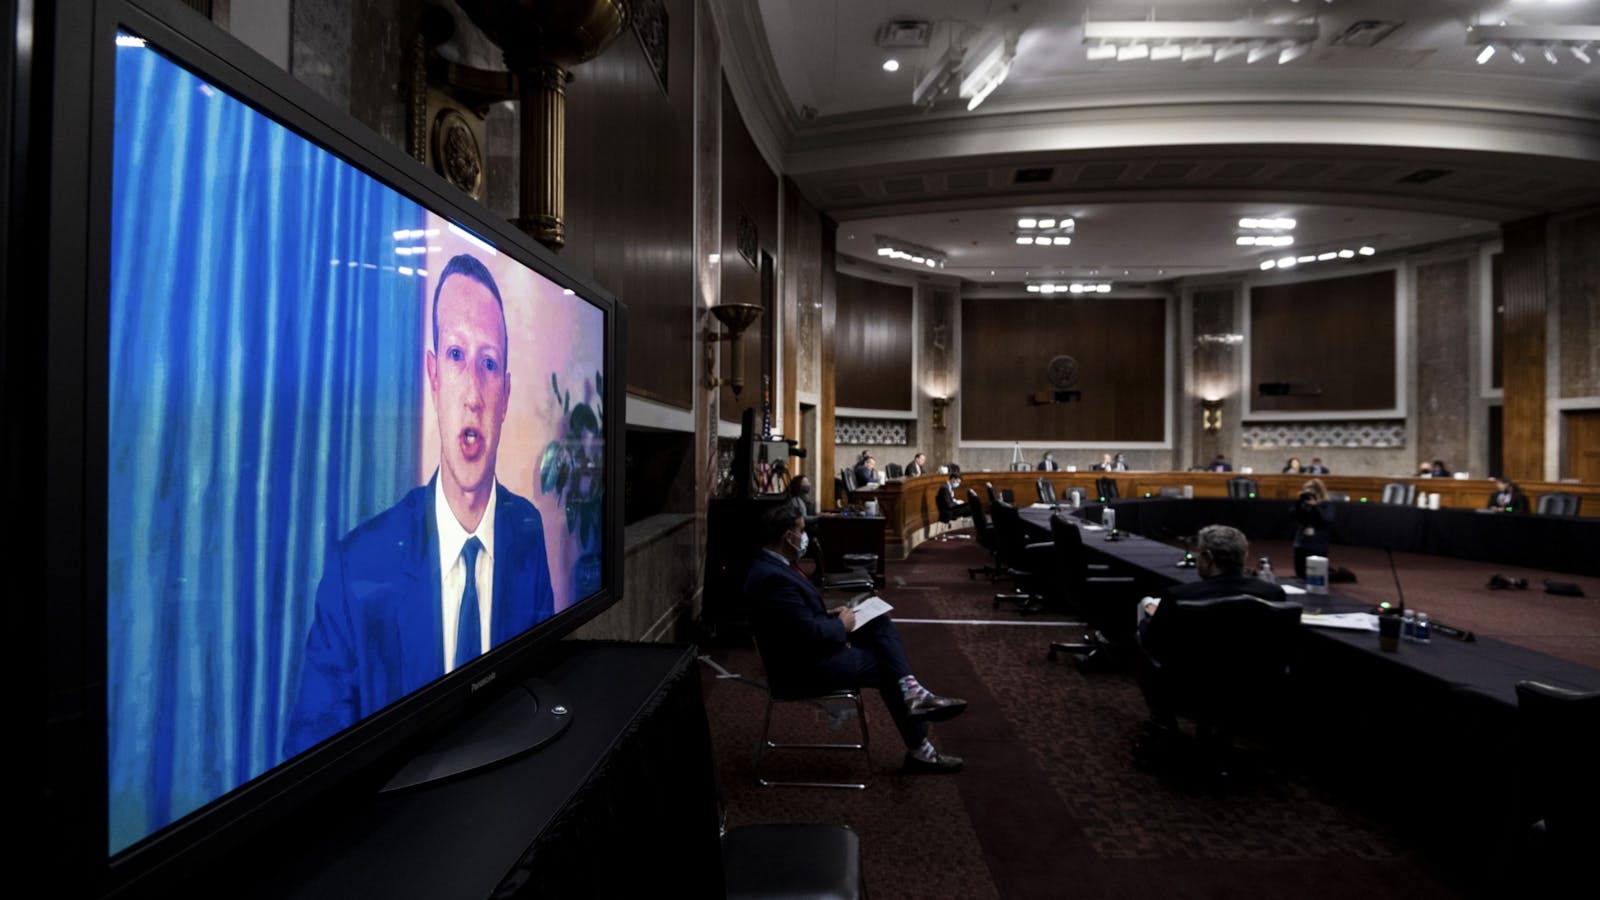 Facebook CEO Mark Zuckerberg appearing at the Judiciary Committee hearing today. Photo by Bloomberg.